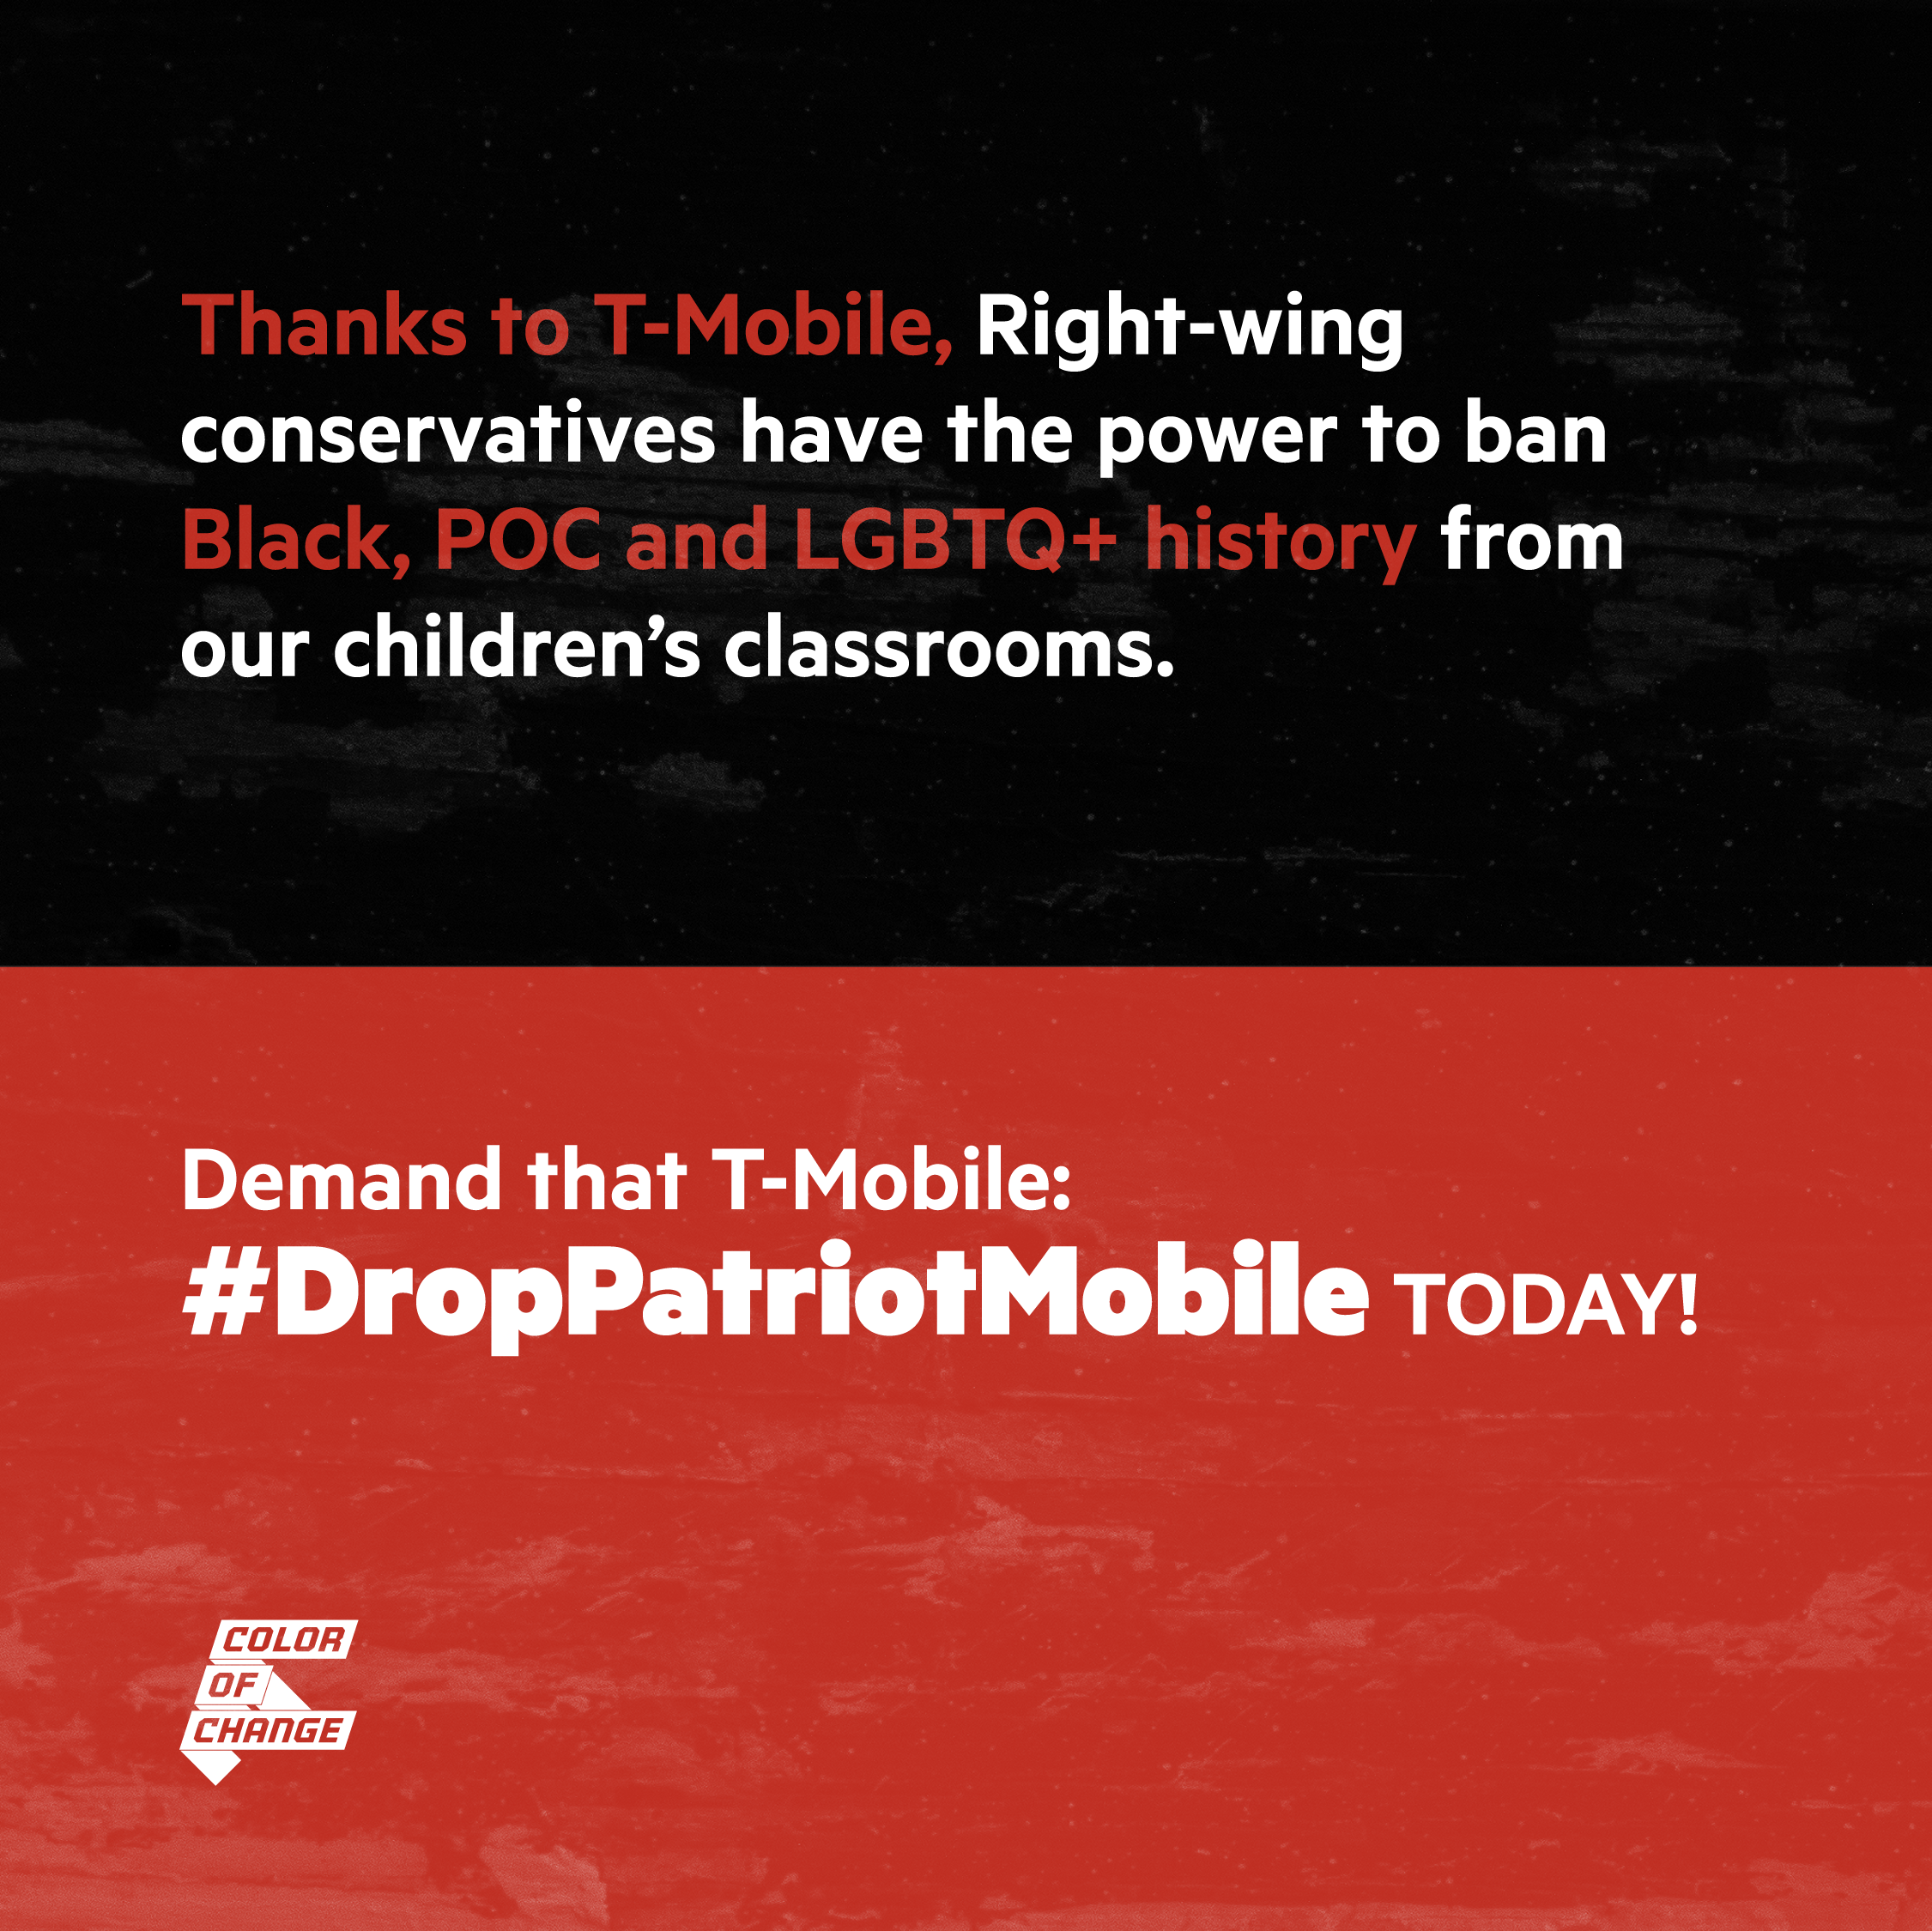 Black and red background with white text that reads: “Thanks to T-Mobile, right-wing conservatives have the power to ban Black, POC, and LGBTQ+ history from our children’s classrooms. Demand that T-Mobile #DropPatriotMobile TODAY!